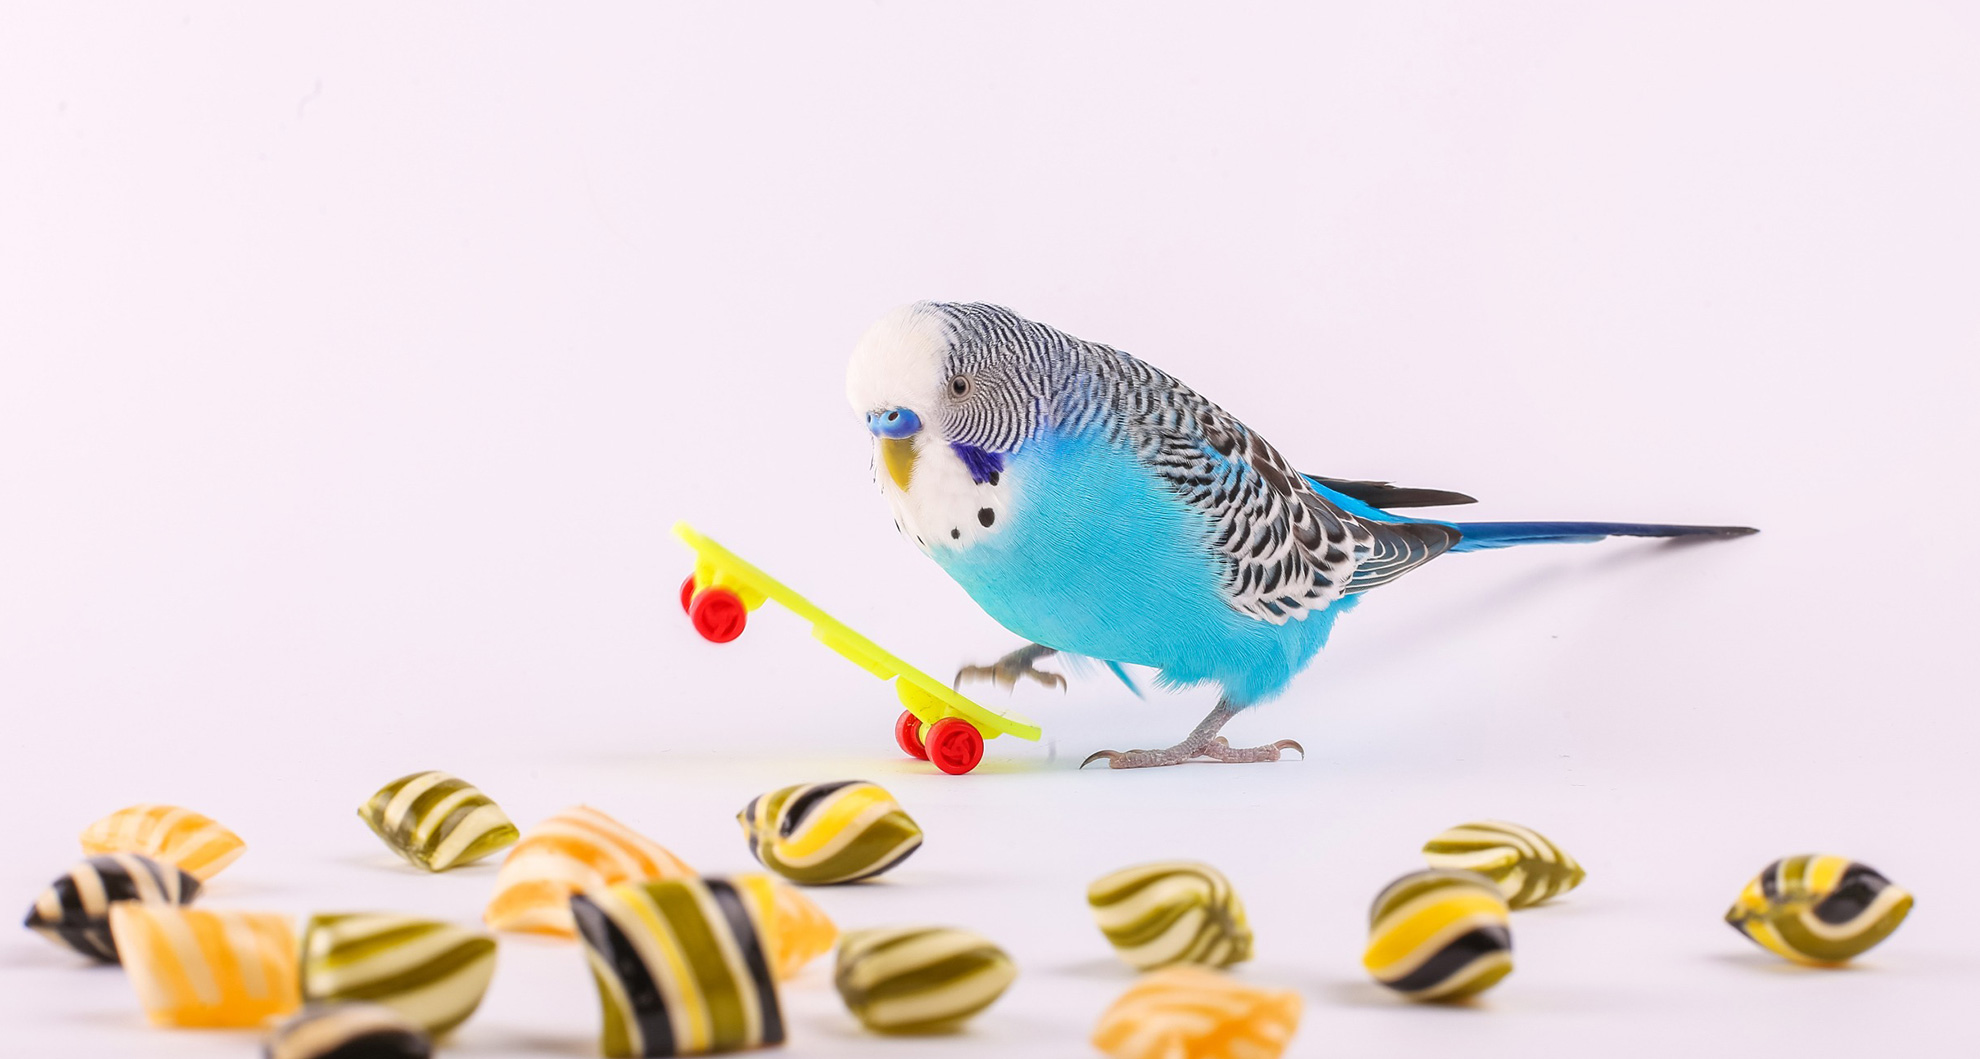 Exercise and Mental Stimulation for Birds 101